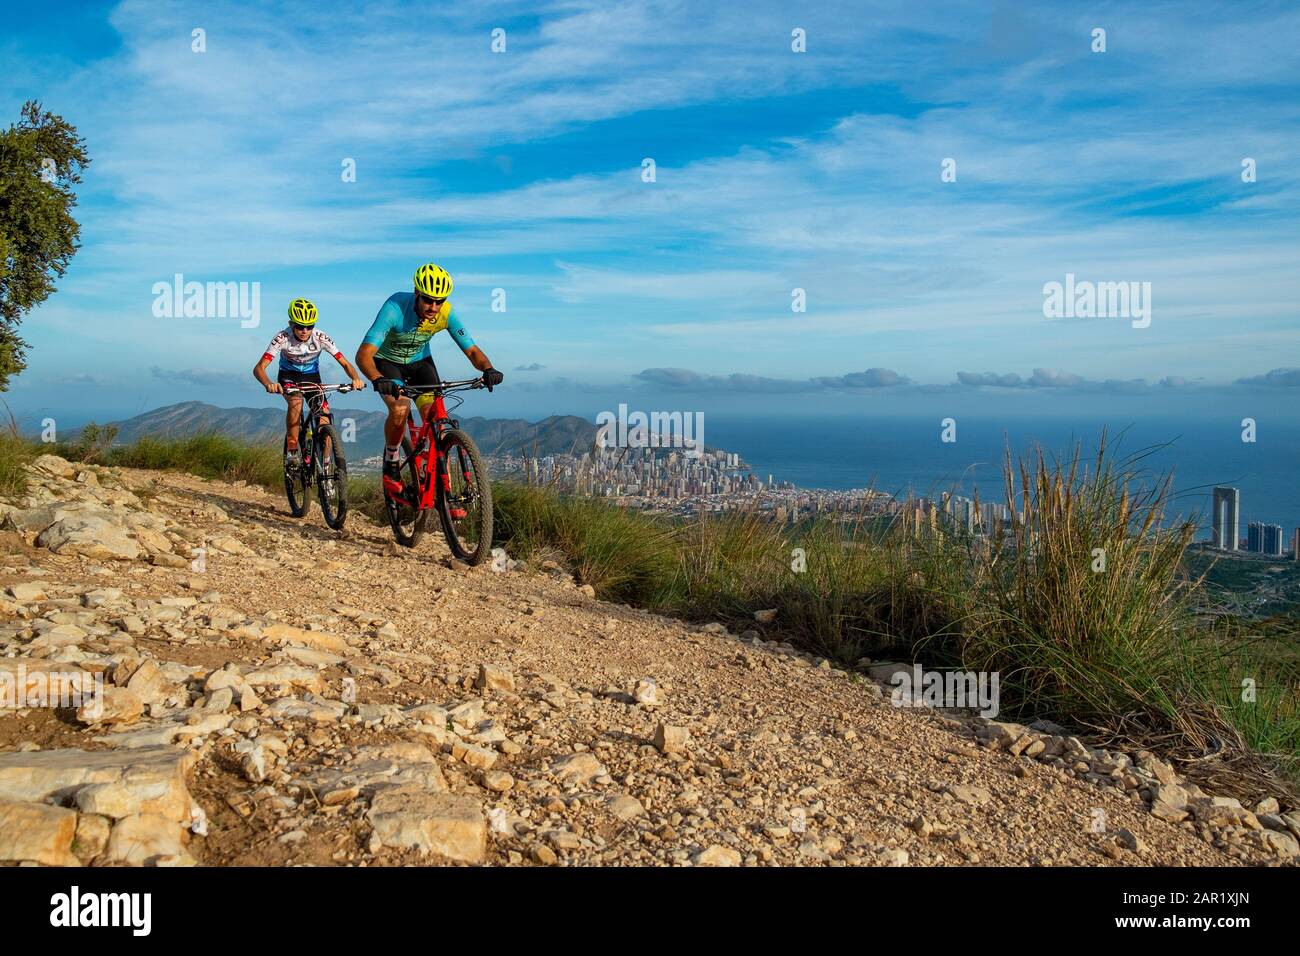 Two mountain bikers riding on hill with Benidorm city in the background, Sierra Cortina, Benidorm, Alicante province, Spain Stock Photo